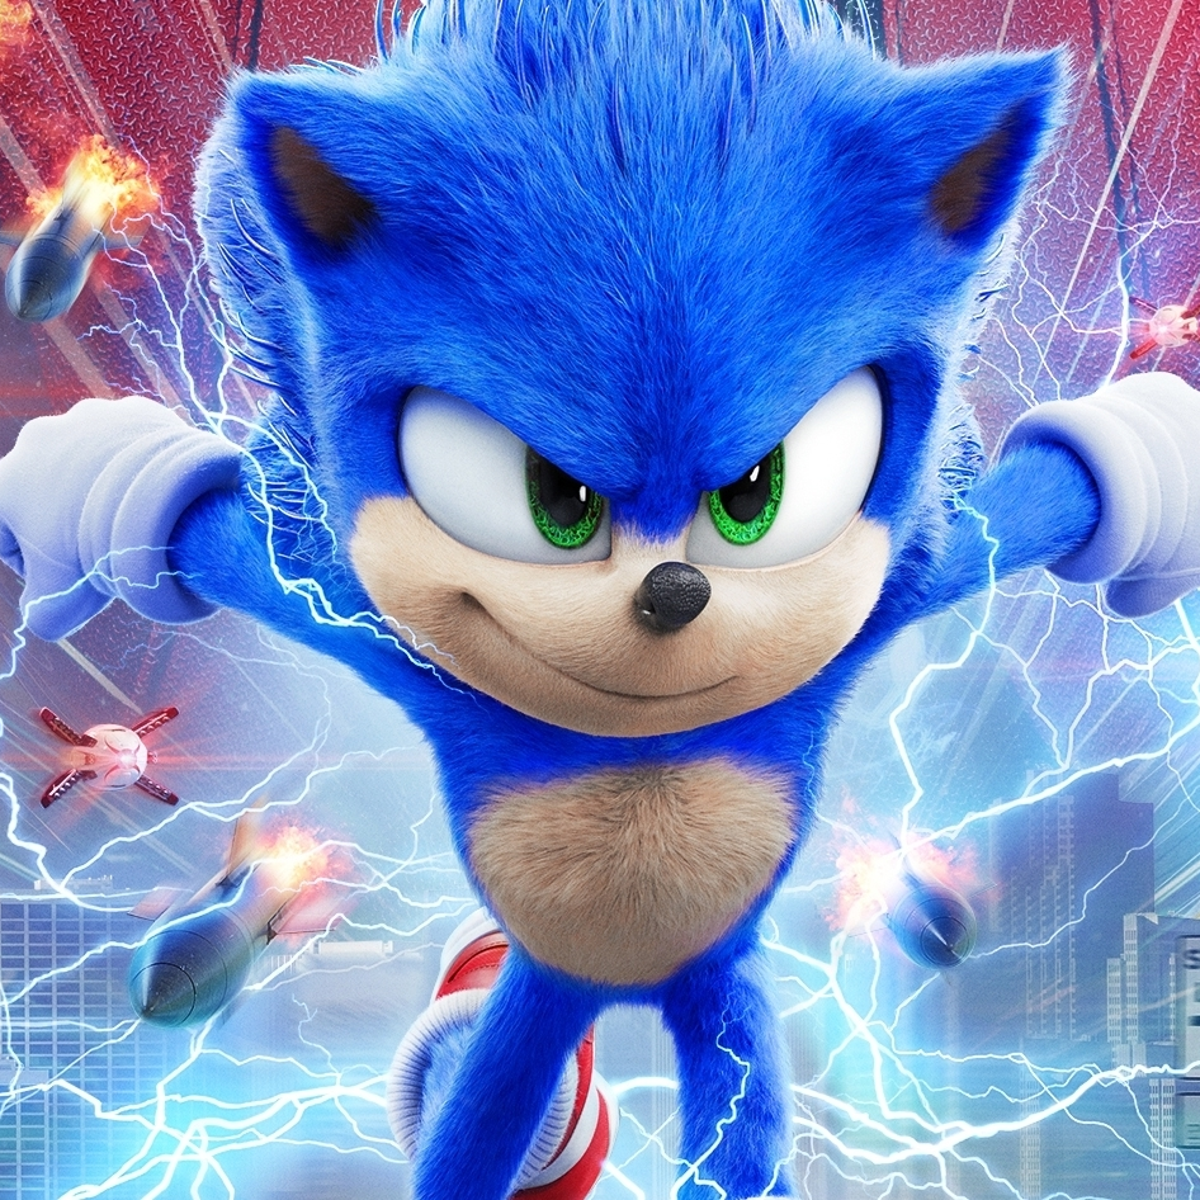 Sonic Movie 3 (2024) - What To Expect In The Trilogy Conclusion